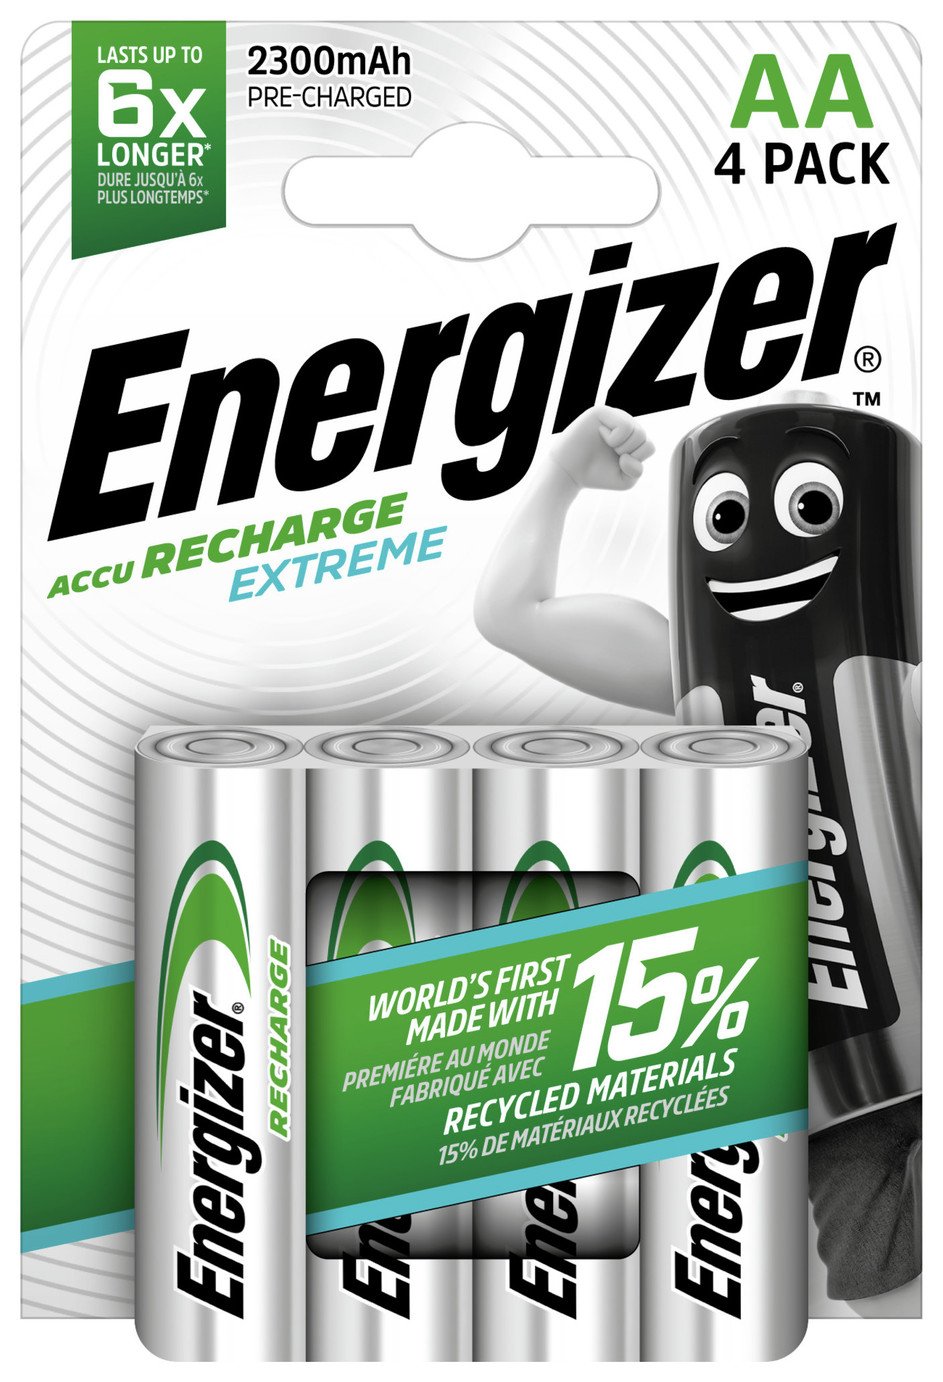 Energizer Extreme AA Rechargeable Batteries Pack of 4